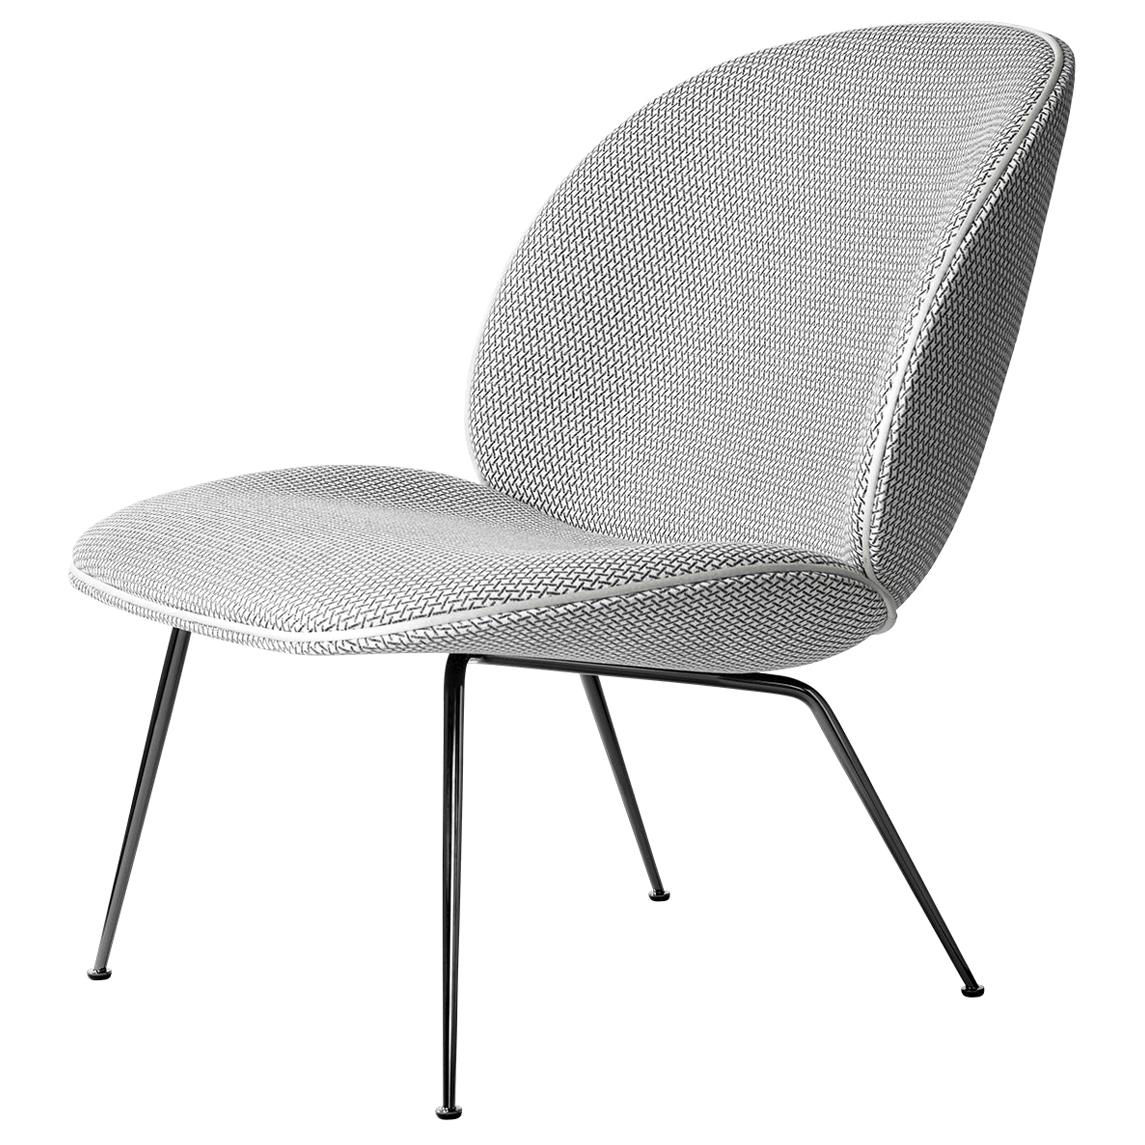 Beetle Lounge Chair, Fully Upholstered, Conic Base, Chrome